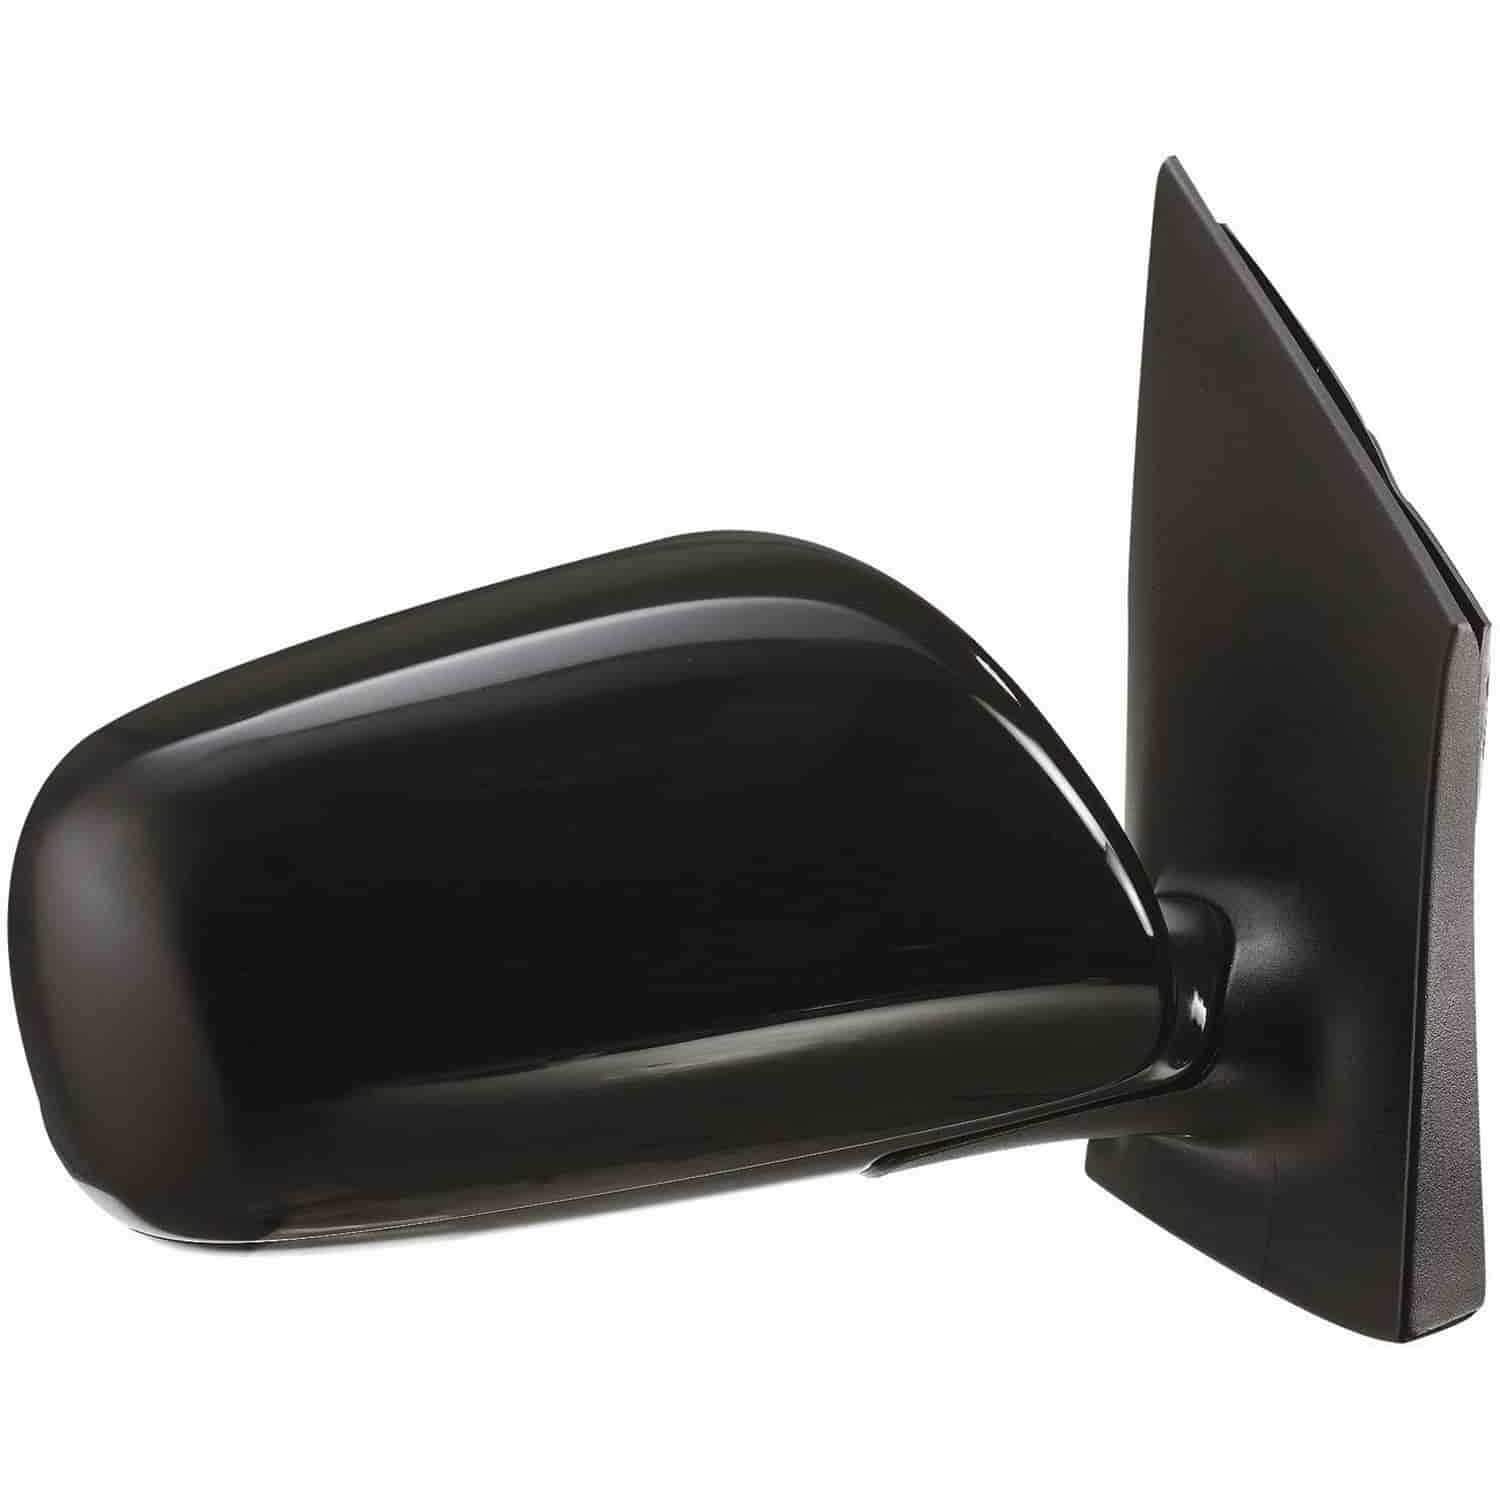 OEM Style Replacement mirror for 07-11 Toyota Yaris Sedan passenger side mirror tested to fit and fu